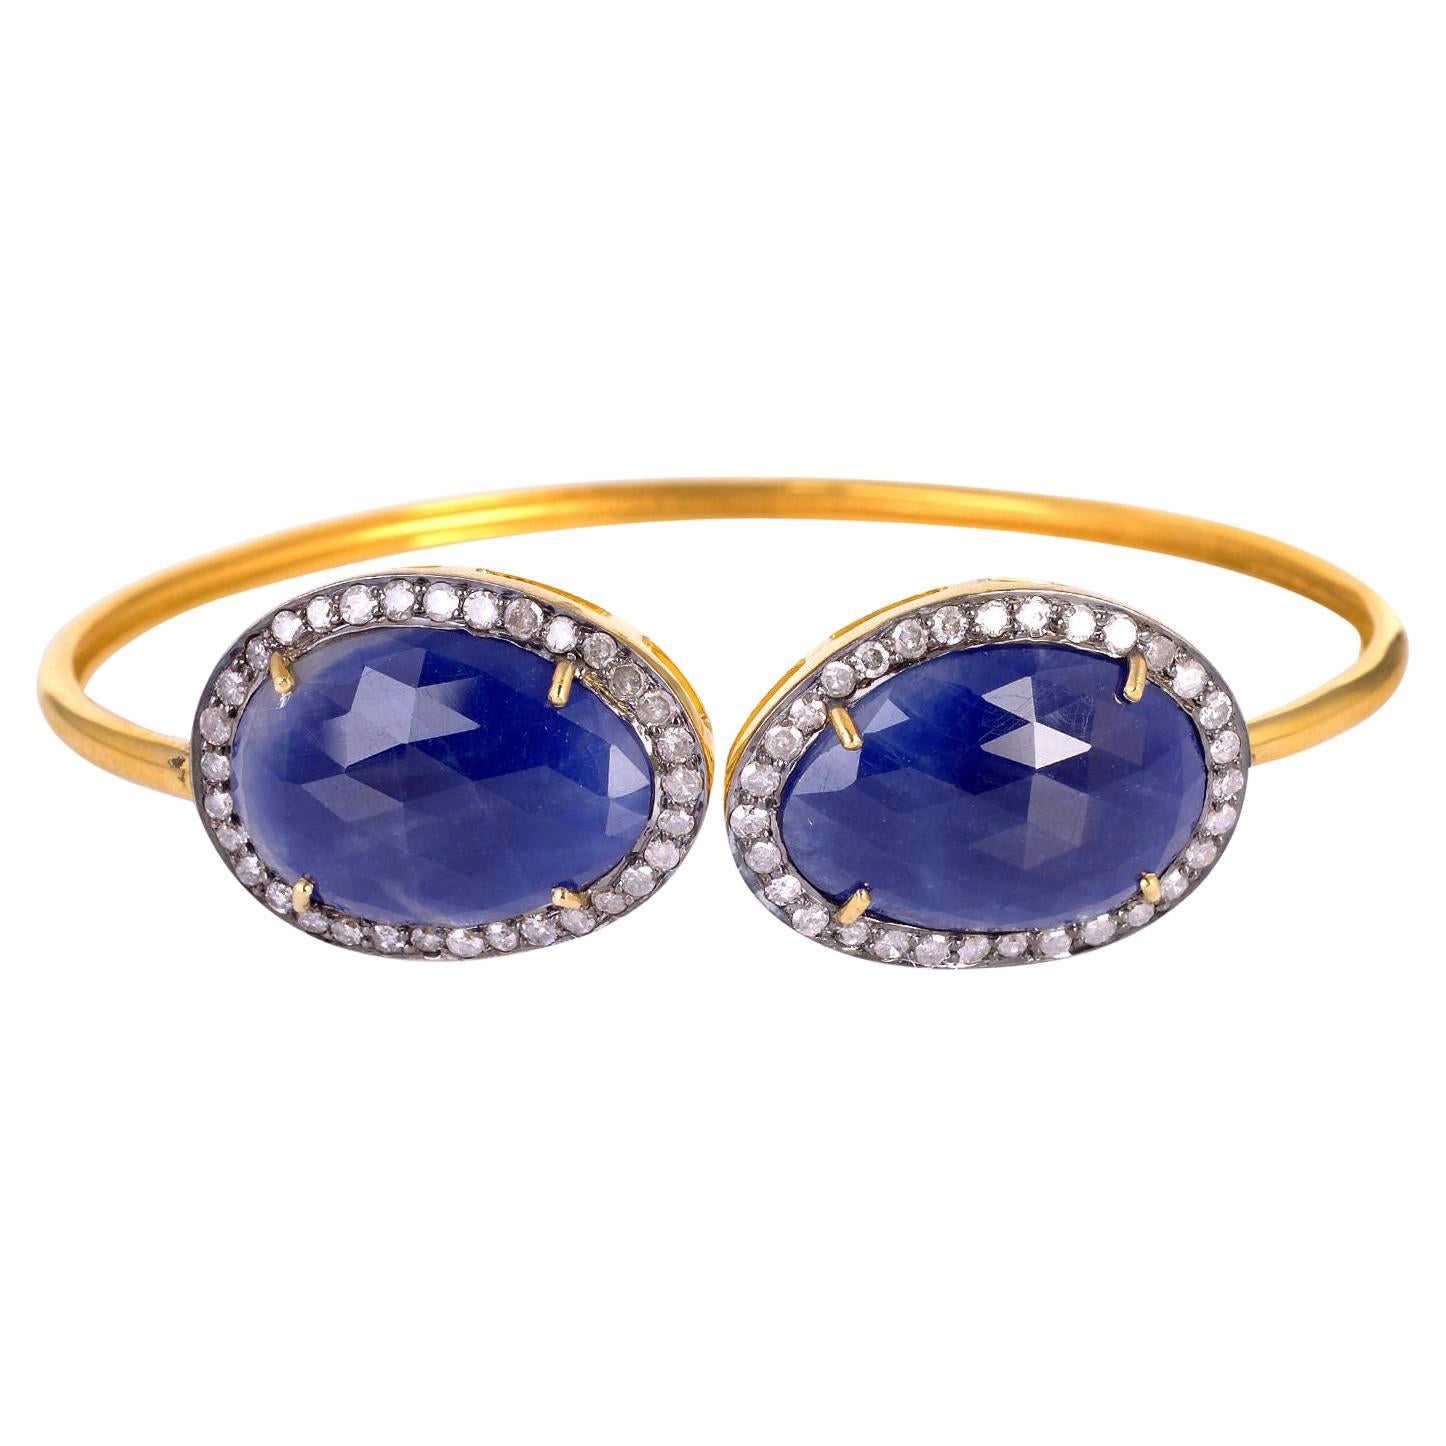 Designer Cuff Bracelet with Blue Sapphire Stones Surrounded by Pave Diamonds